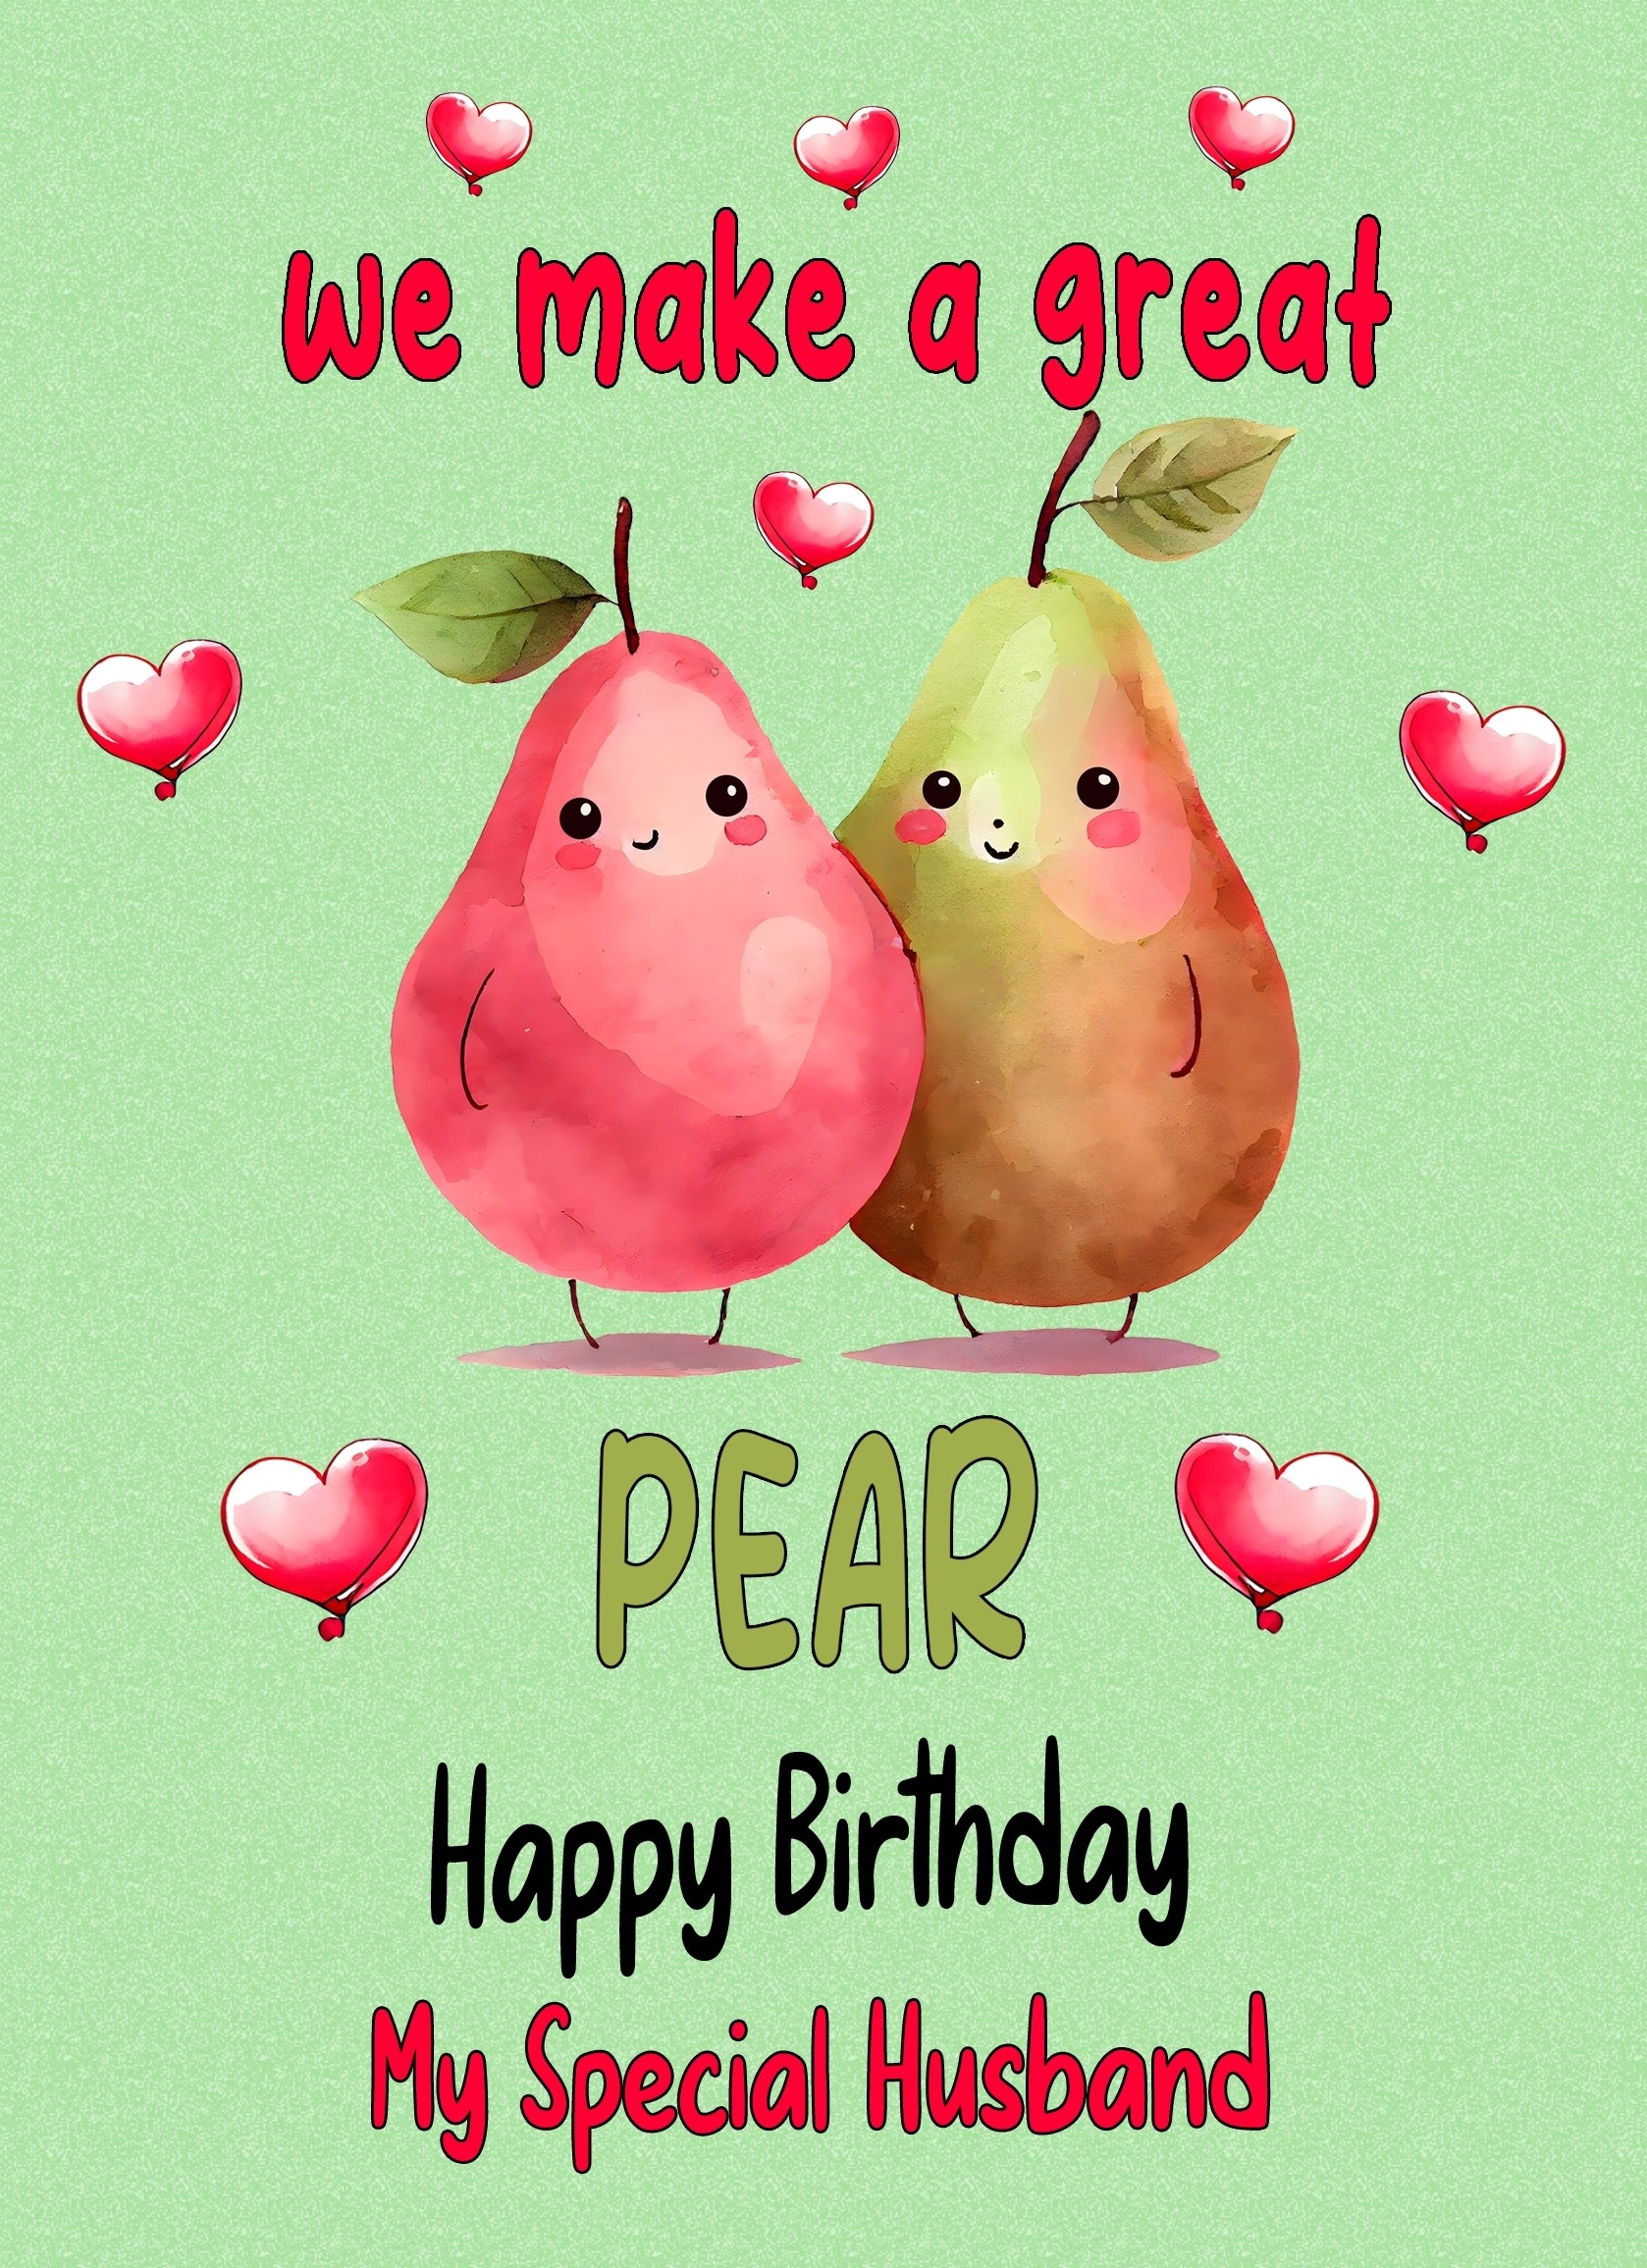 Funny Pun Romantic Birthday Card for Husband (Great Pear)